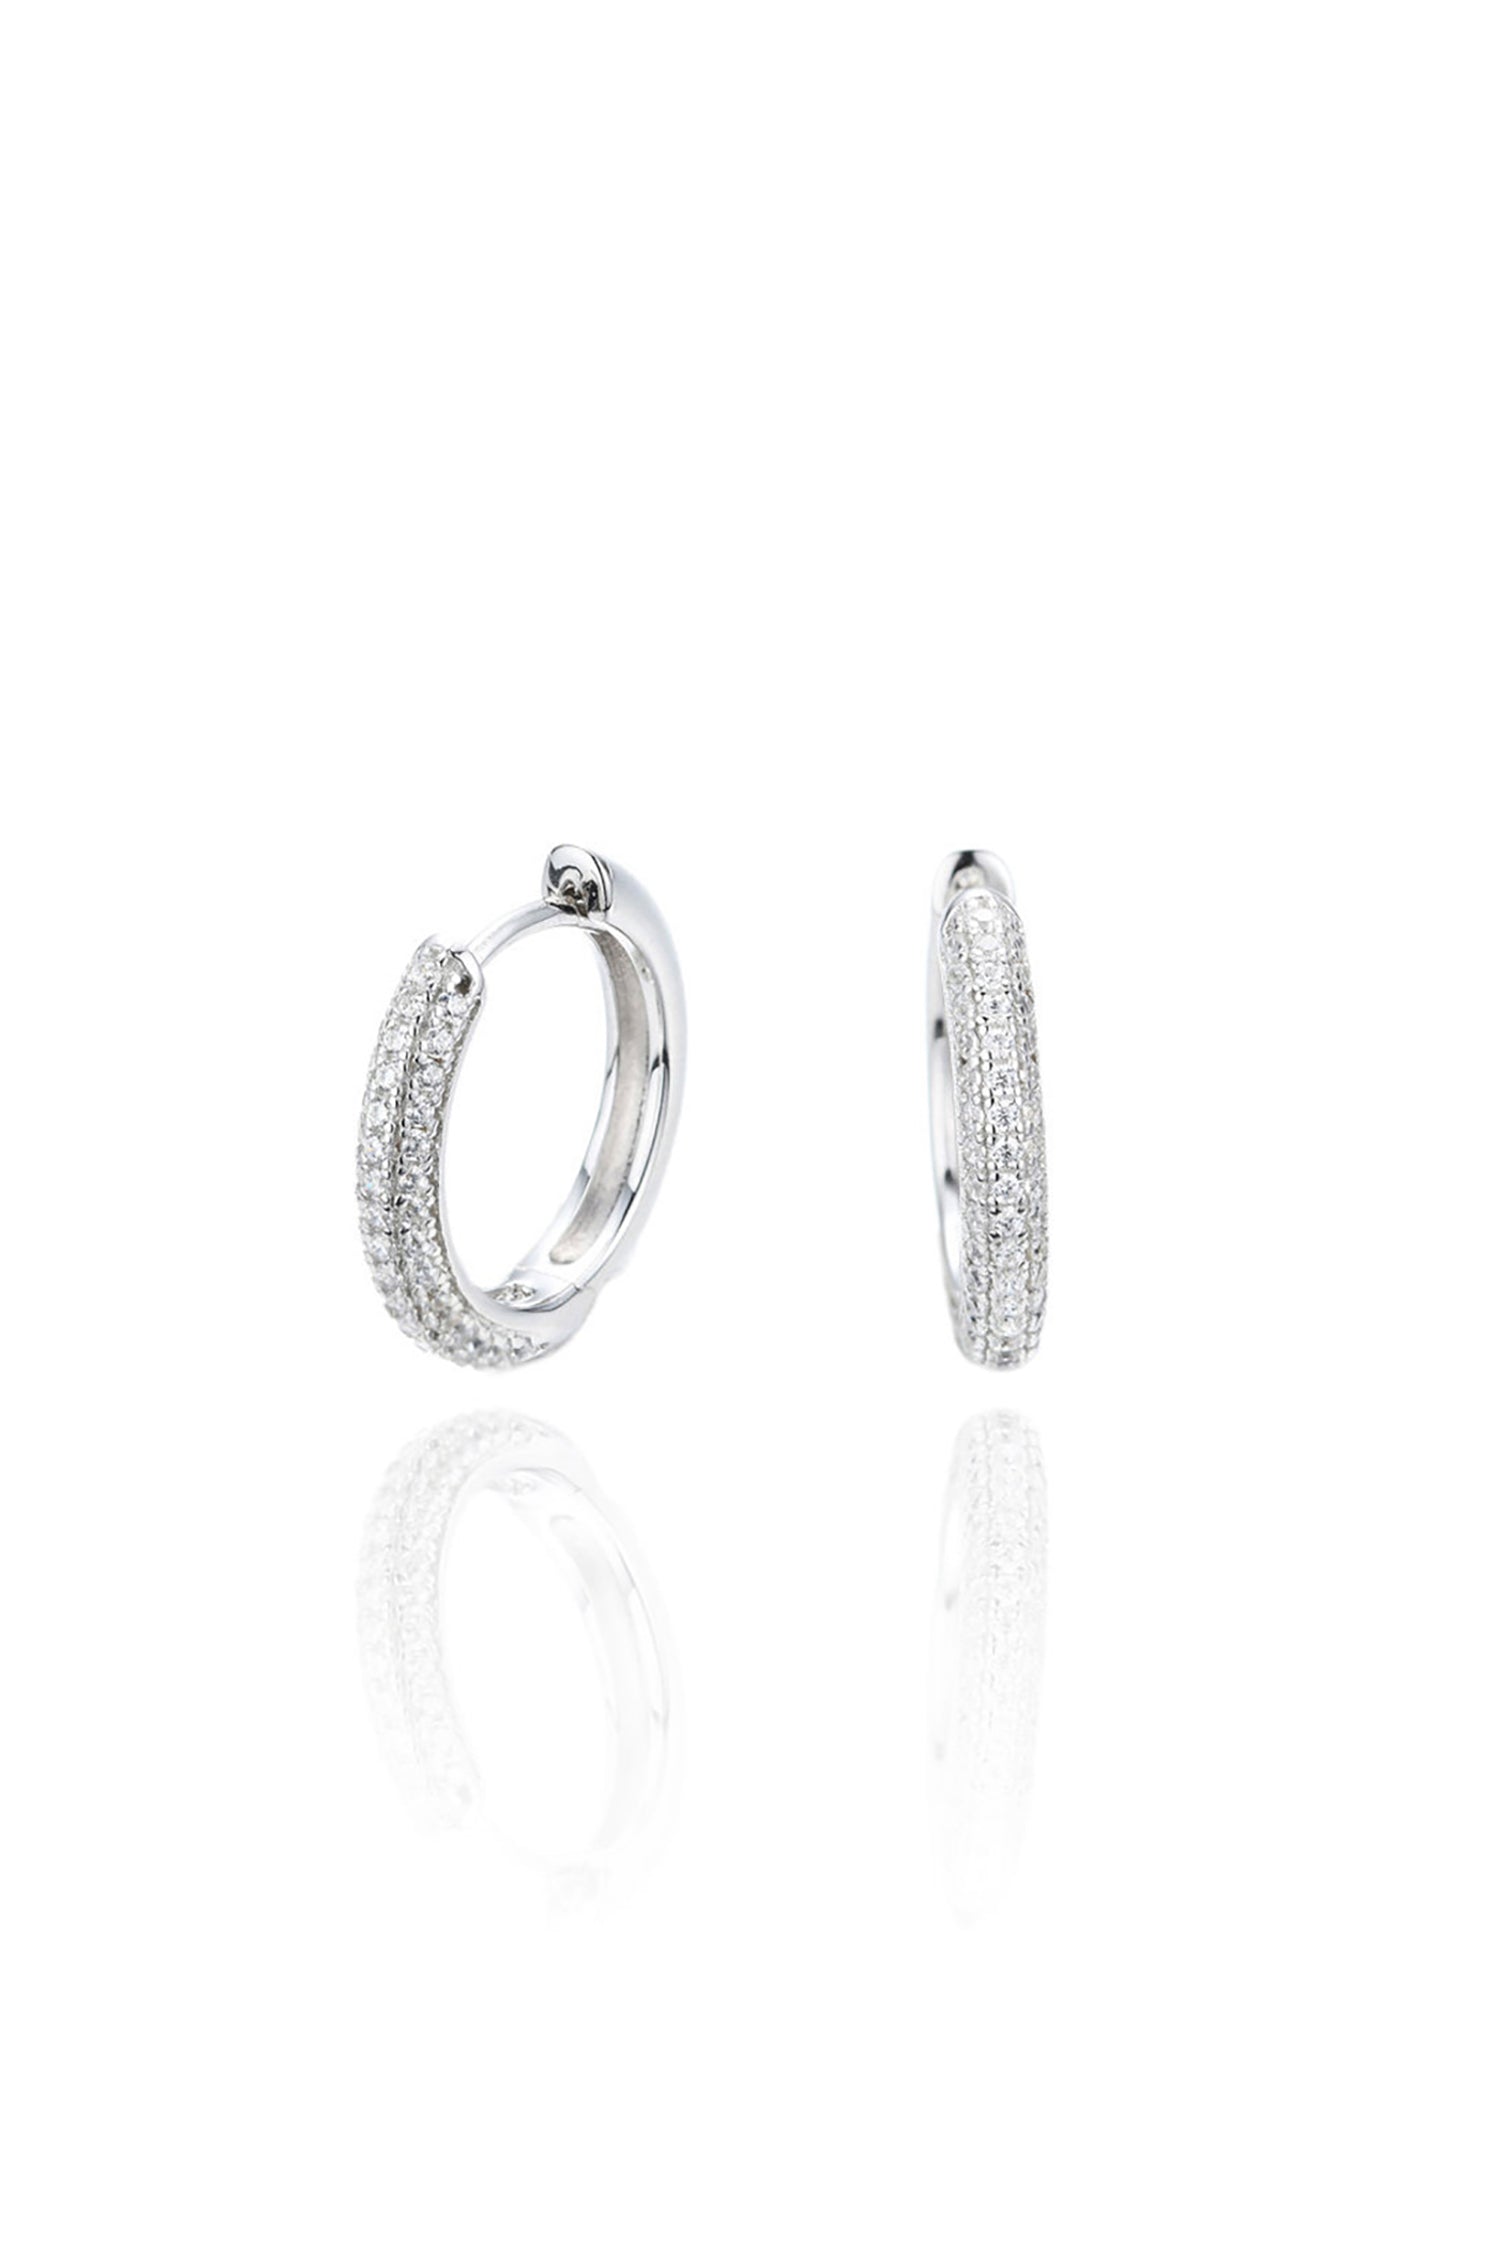  Pave Hoop Huggies Sterling Silver White Background